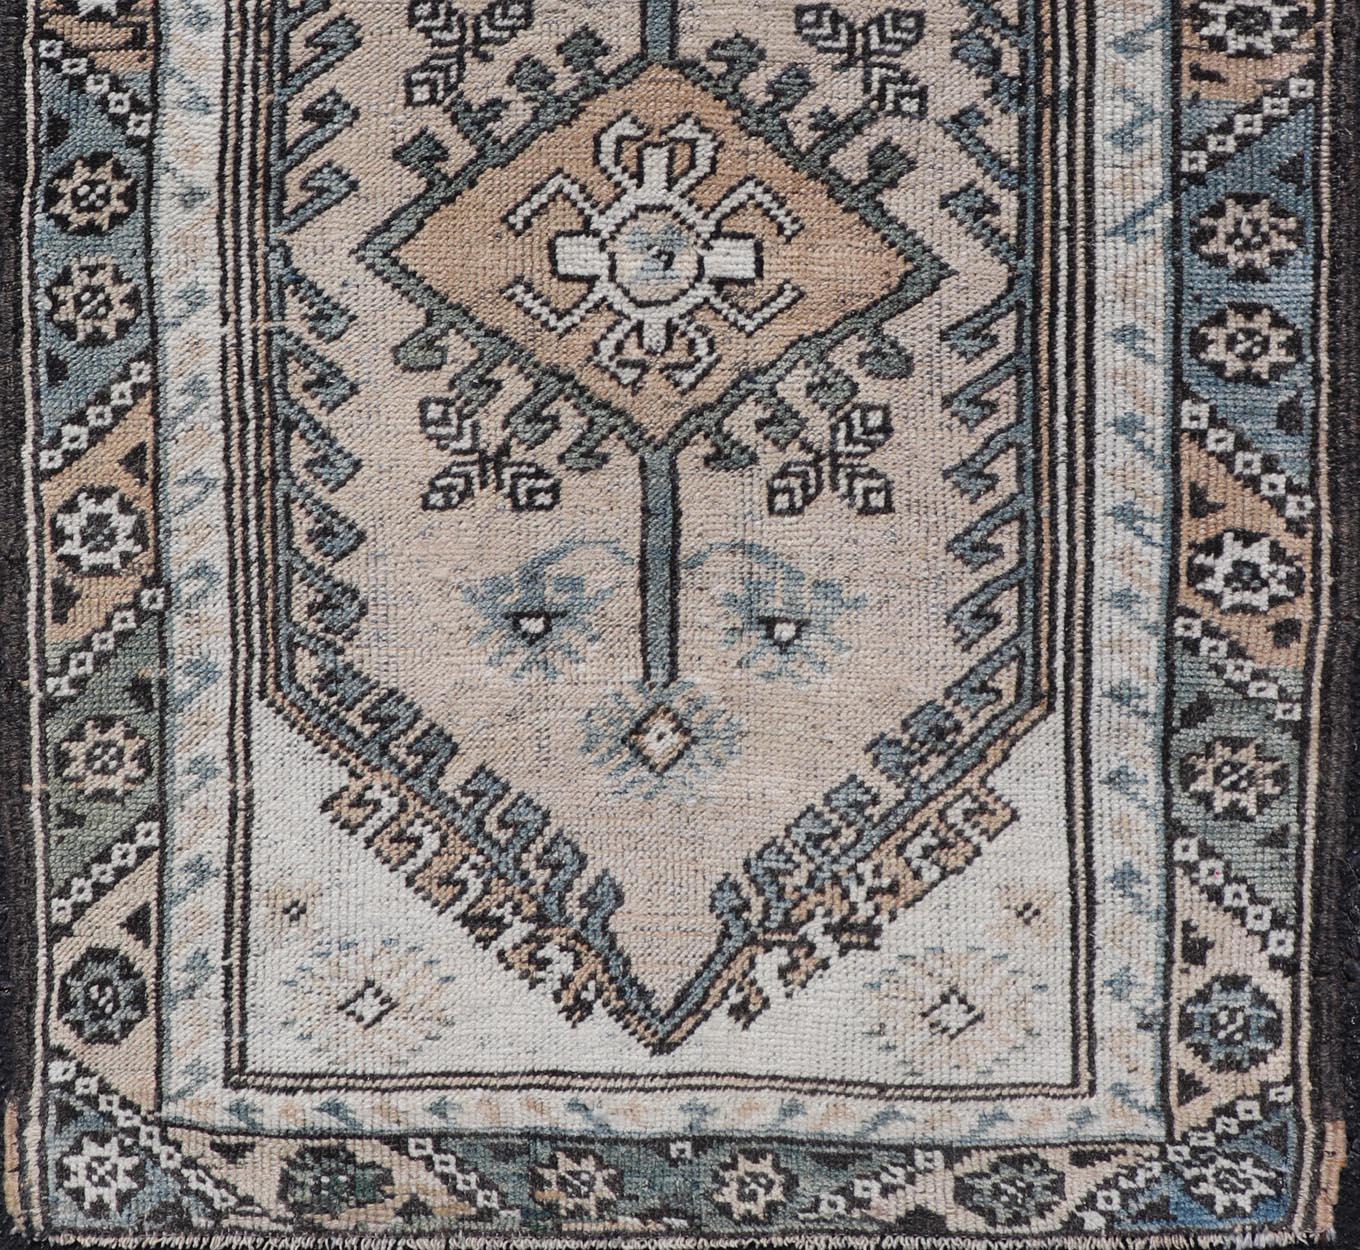 20th Century Vintage Turkish Medallion Oushak Area Rug in Various Blue, Taupe, Brown & Cream